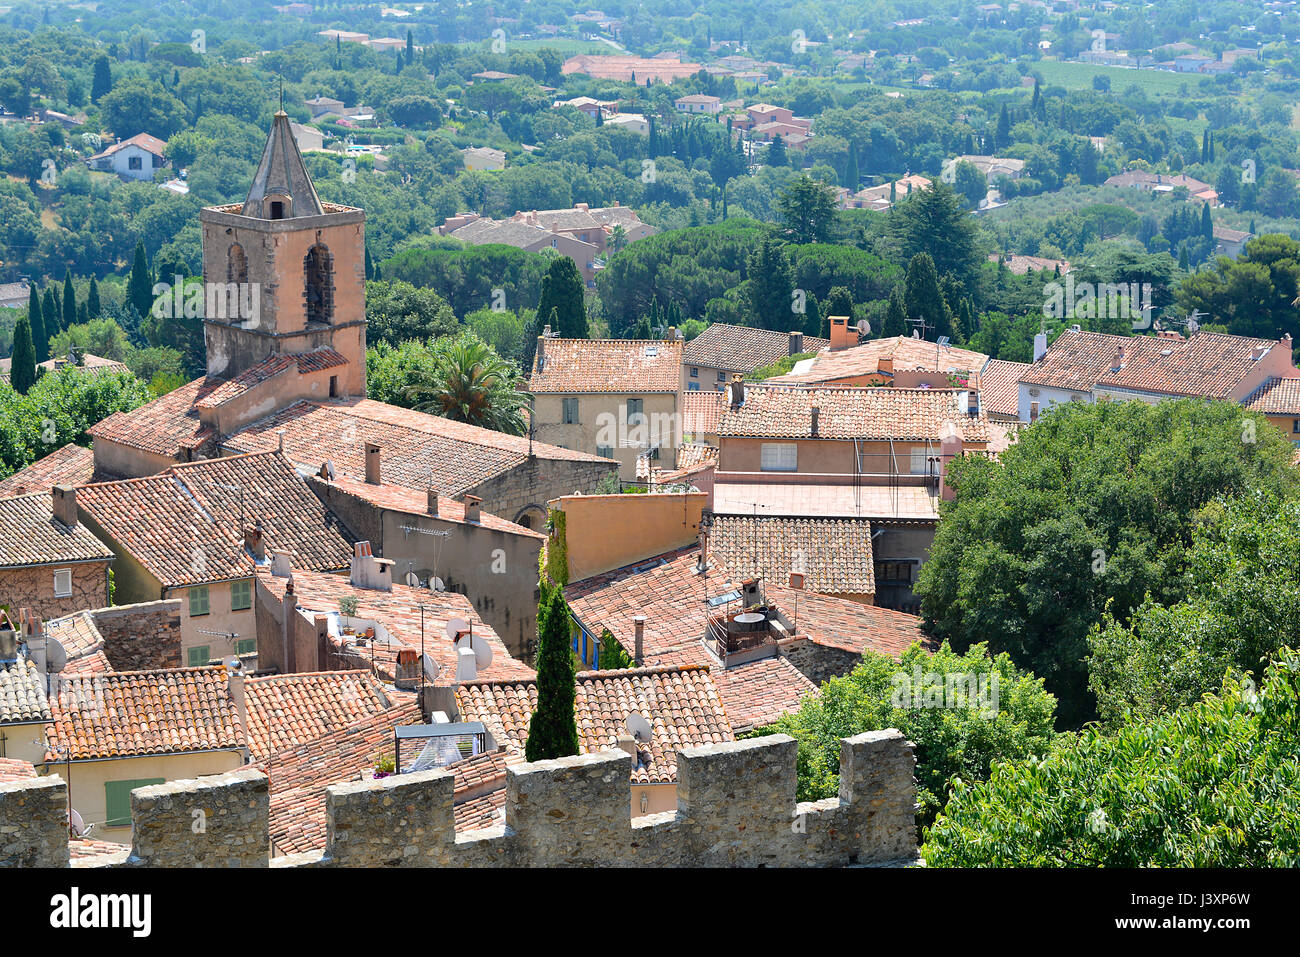 Fortified village of Grimaud, commune in the Var department in the Provence-Alpes-Côte d'Azur region in southeastern France Stock Photo